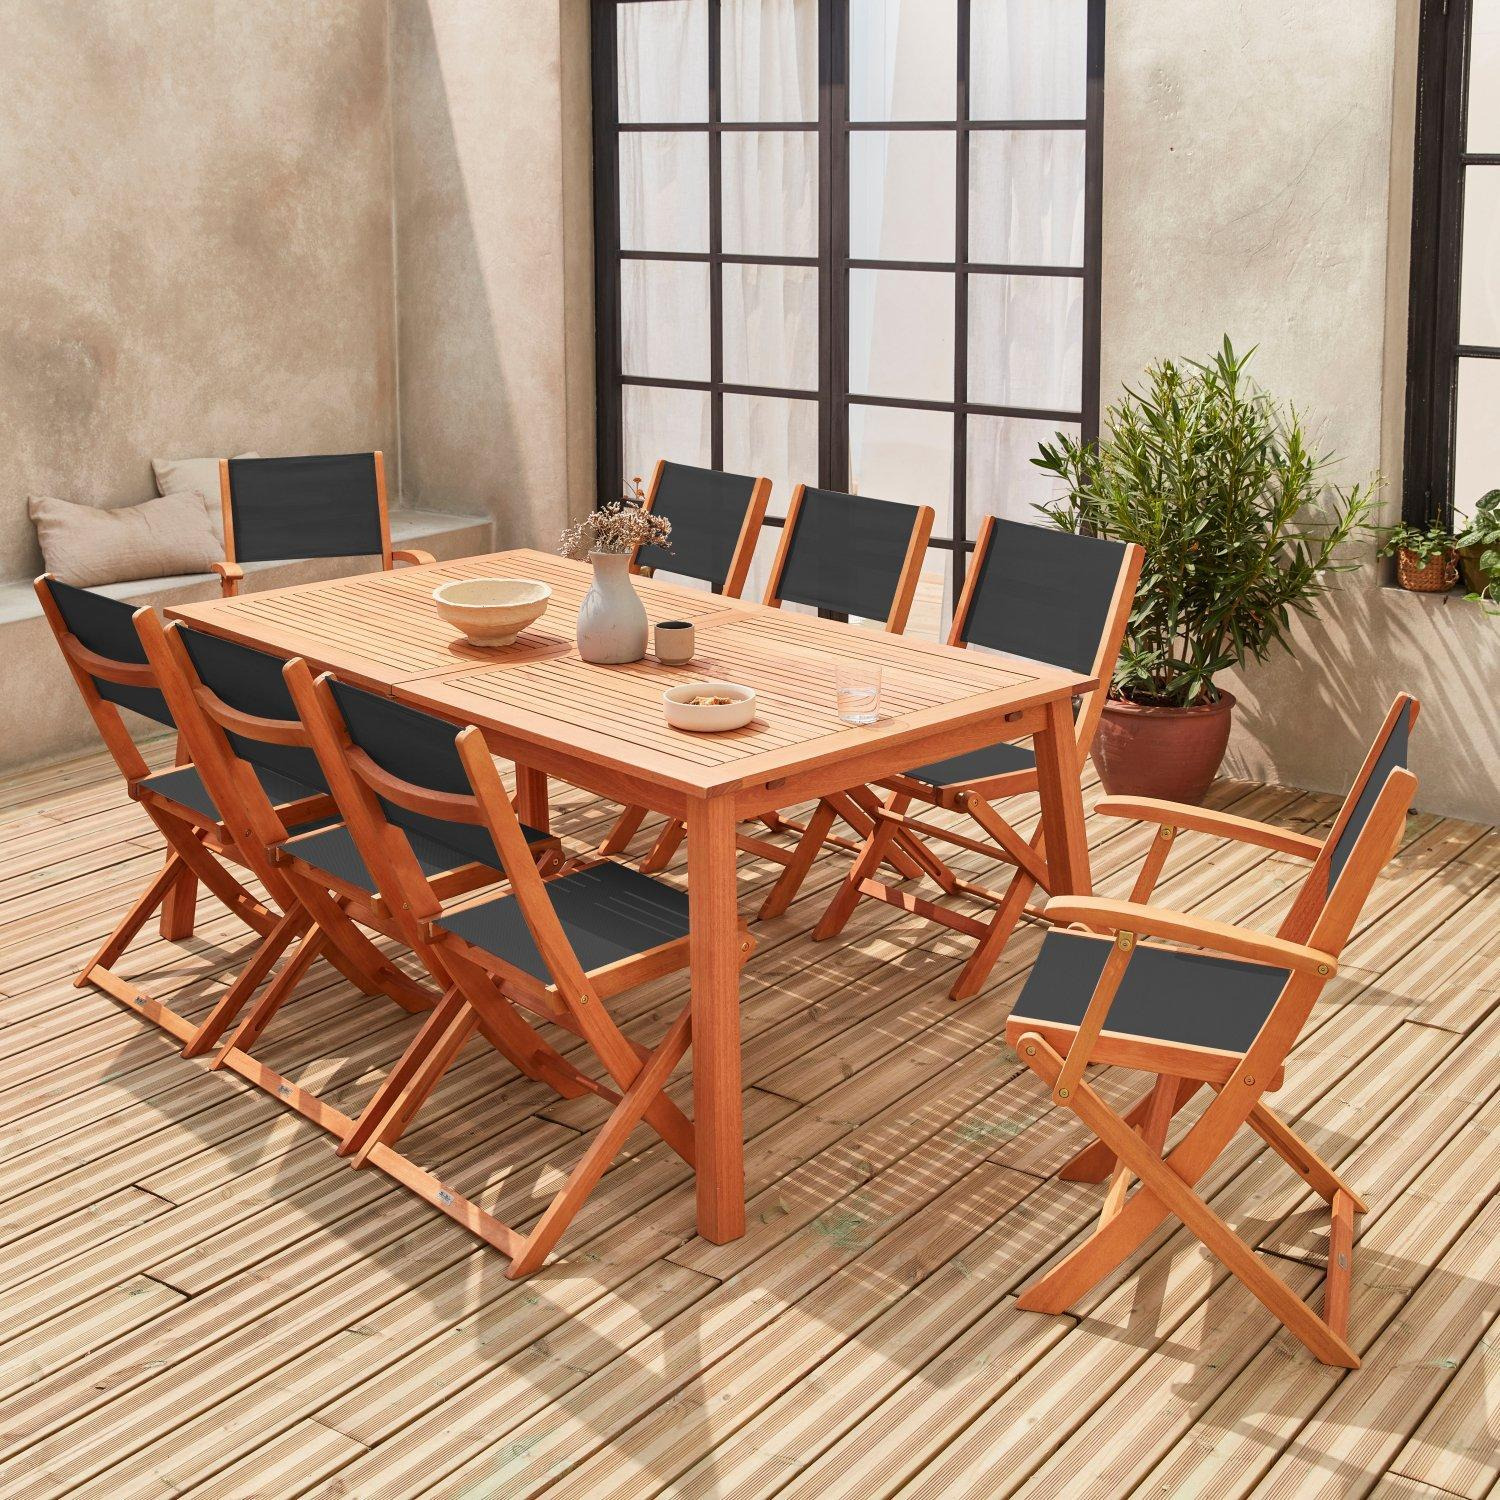 8-seater Extendable Wooden Garden Table Set With Chairs - image 1